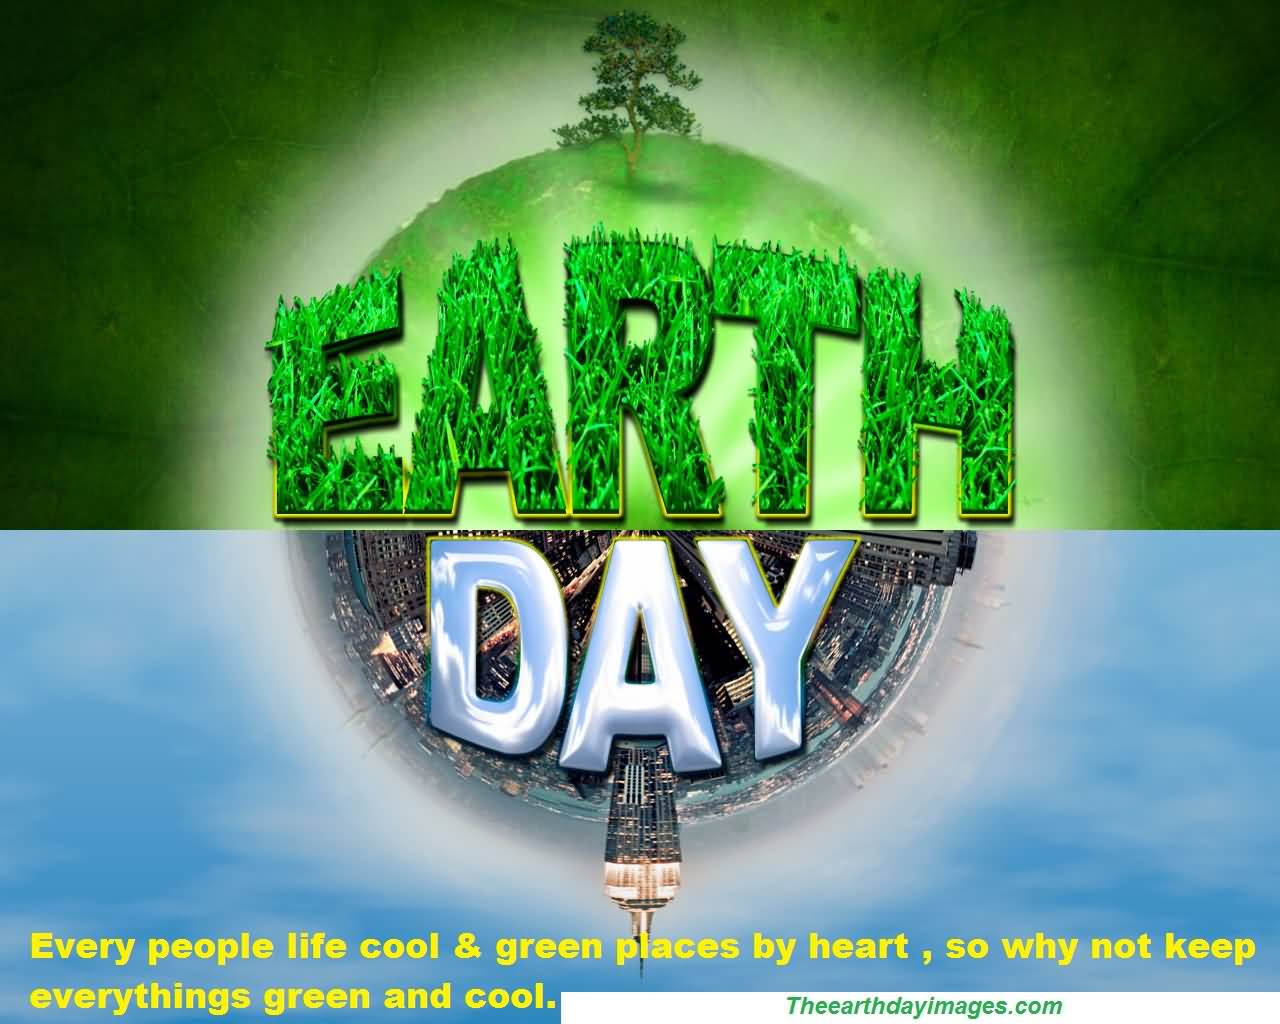 Earth Day Every People Life Cool & Green Places By Heart, So Why Not Keep Everythings Green And Cool